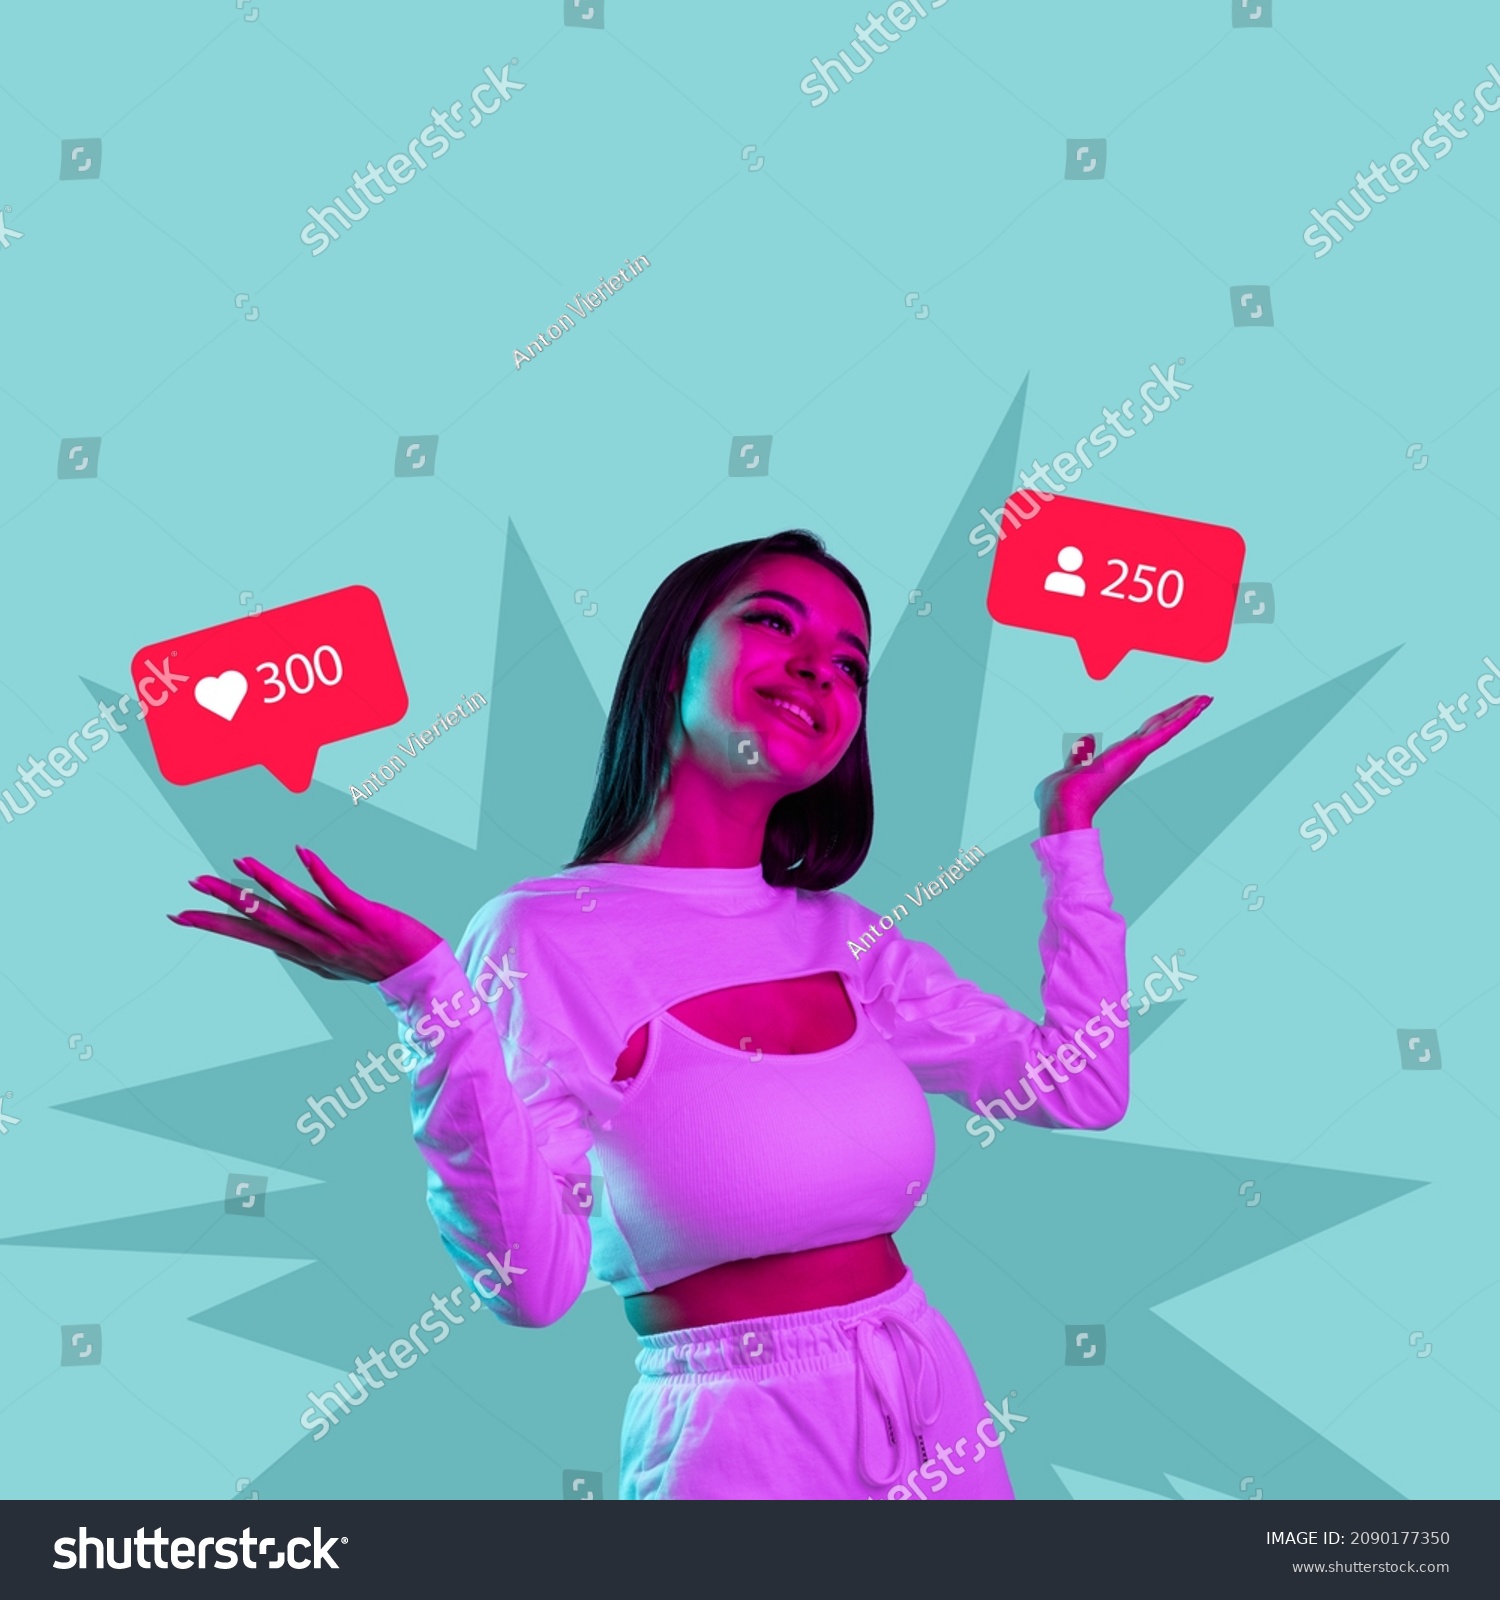 Creative design of young beautiful smiing girl having many social media popularity isolated over blue background. Concept of social media, influence, popularity, modern lifestyle and ad #2090177350